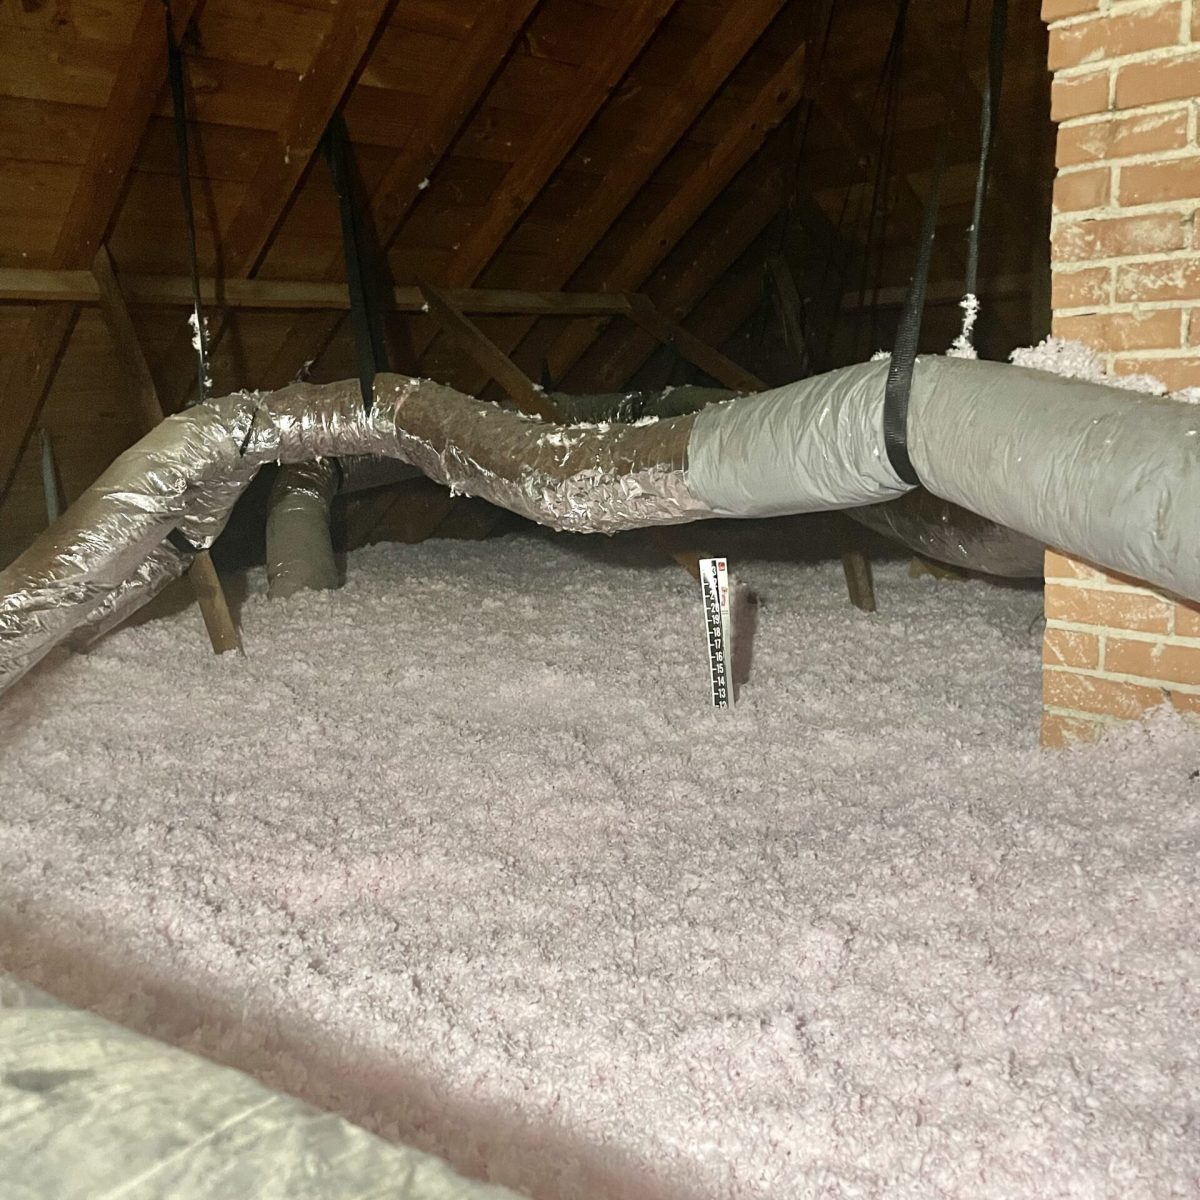 Best Attic Insulation by Elite Insulation Specialist - 1712 Almond Dr, Mansfield, TX 76063, United States 18177930629   http://www.eliteinsulationspecialist.com/   https://www.google.com/maps?cid=1454976148324948402